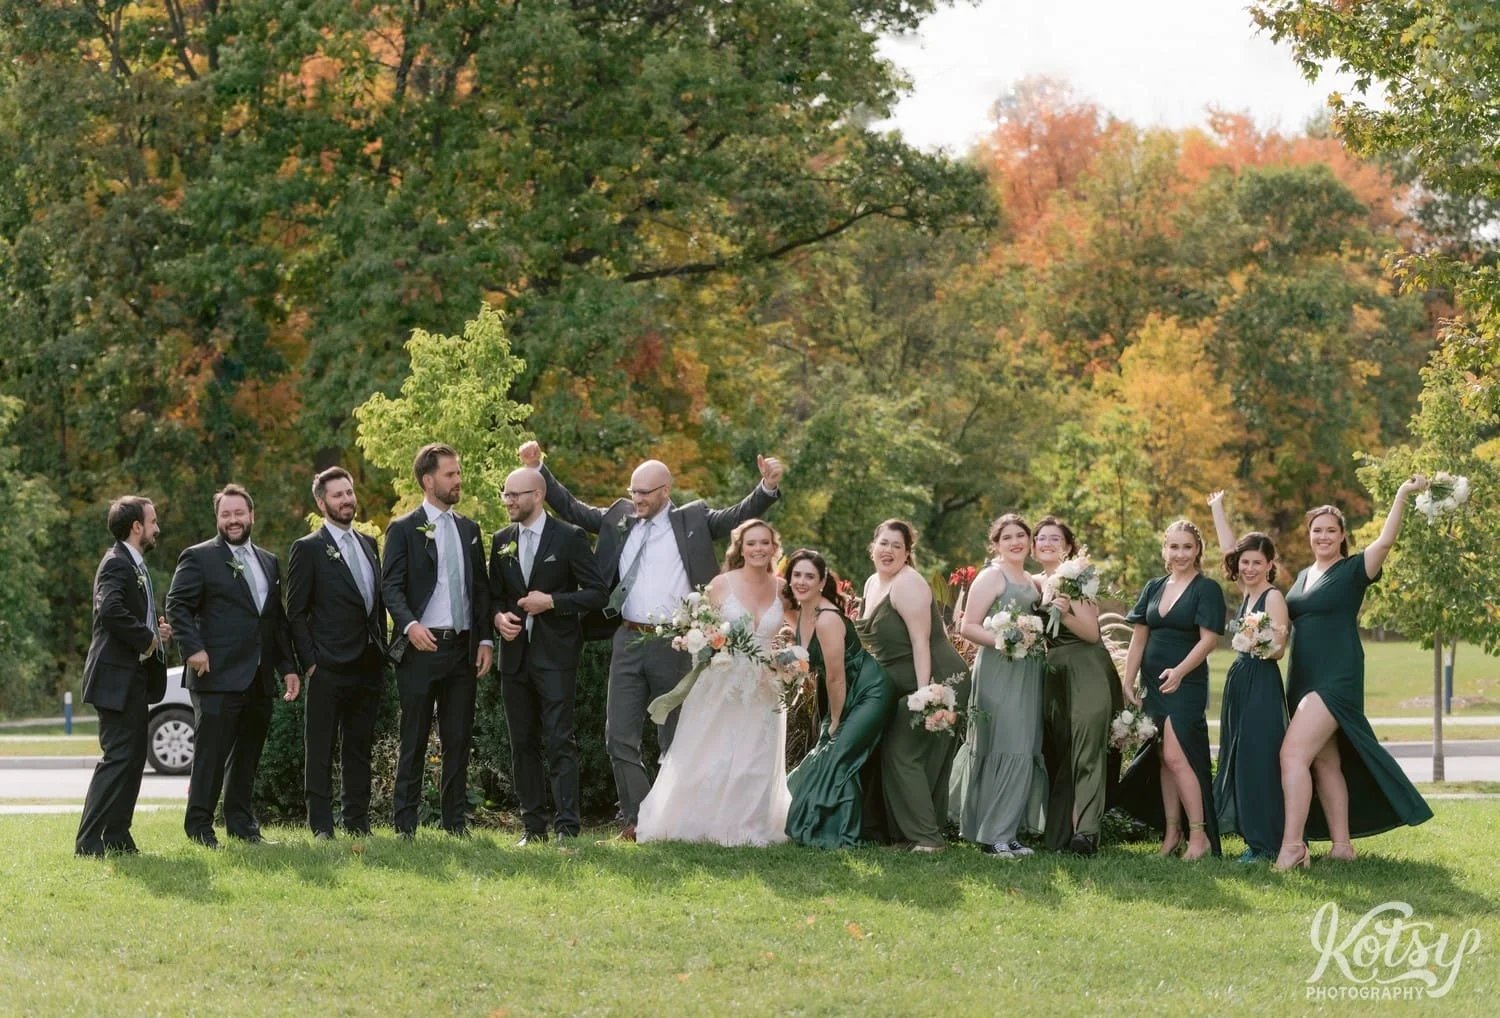 A groom wearing a gray suit and a bride wearing a white bridal gown holding flowers dance and joke around with their wedding party wearing green and black at West Deane Park in Toronto, Canada